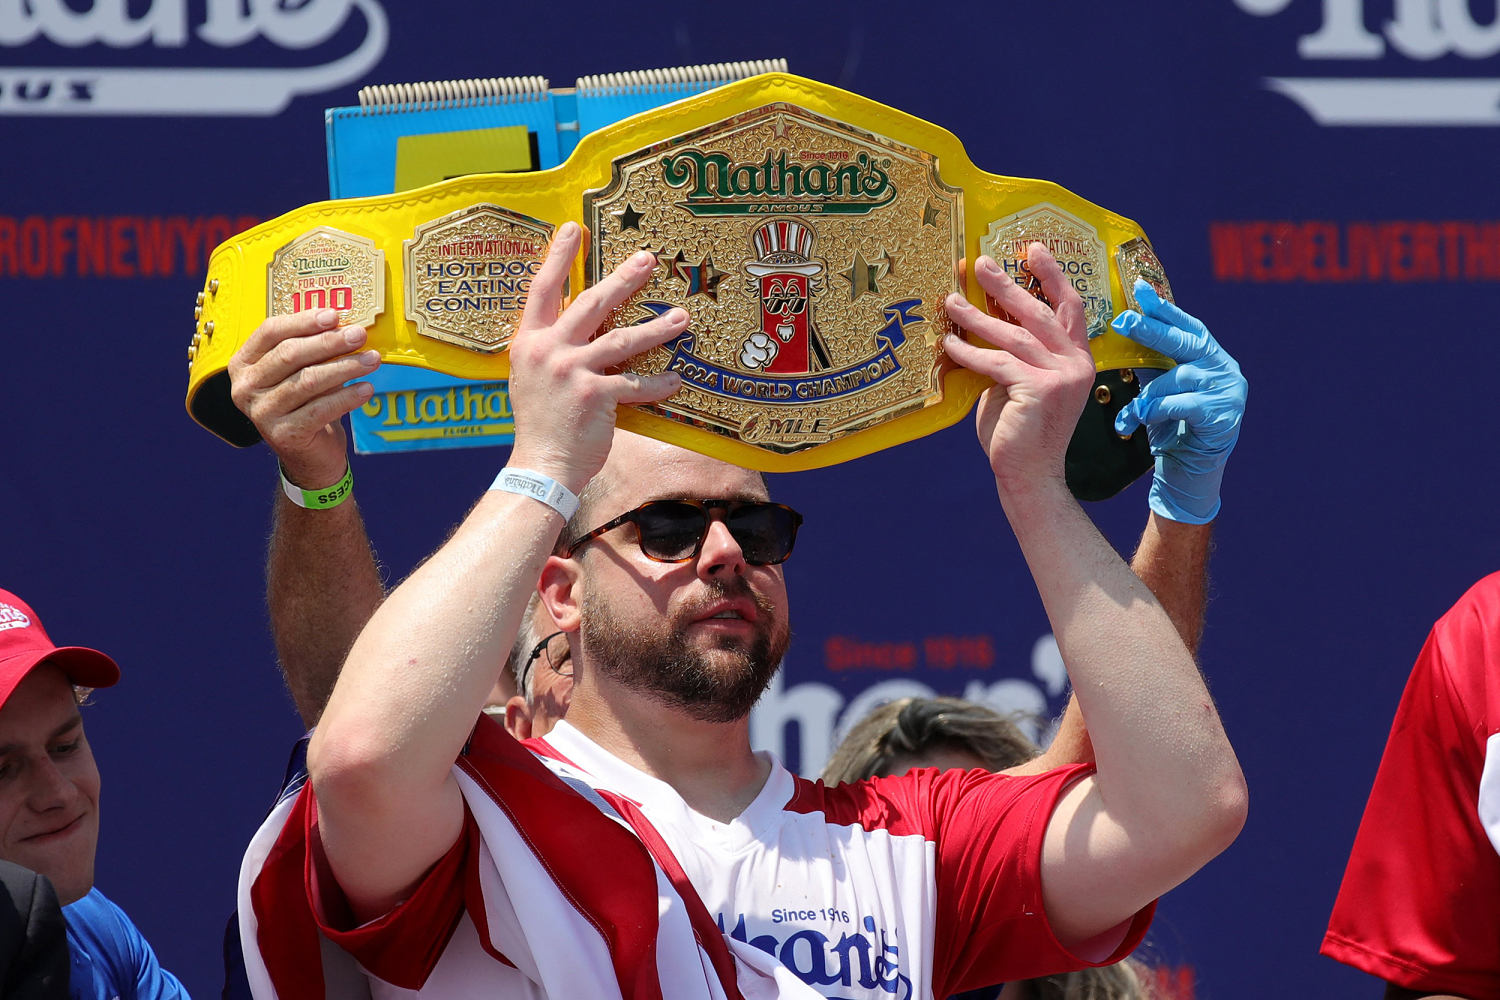 Patrick Bertoletti wins Nathan’s hot dog eating contest as reigning champ Joey Chestnut sits out